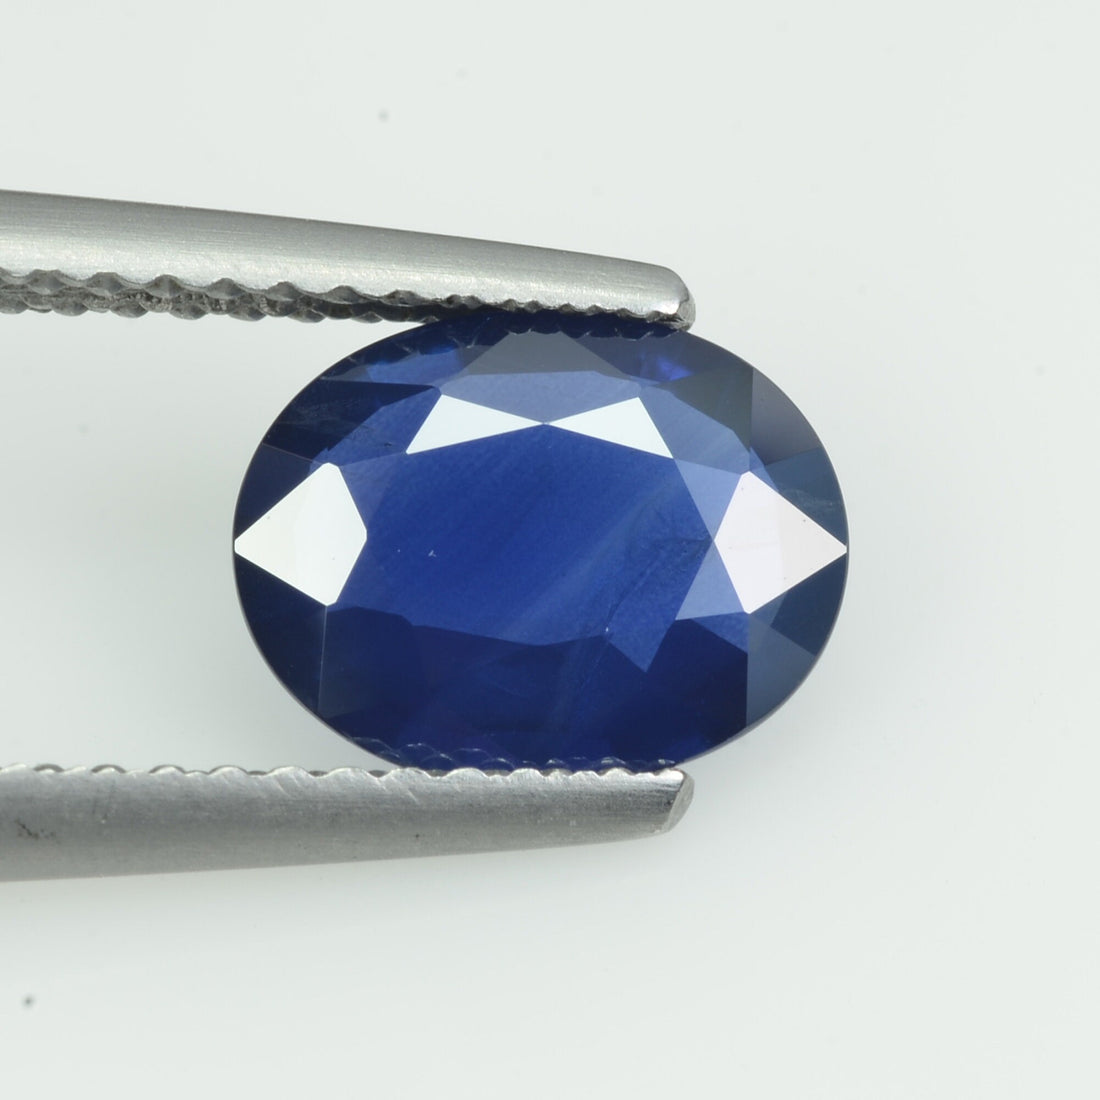 1.57 cts Natural Blue Sapphire Loose Gemstone Oval Cut